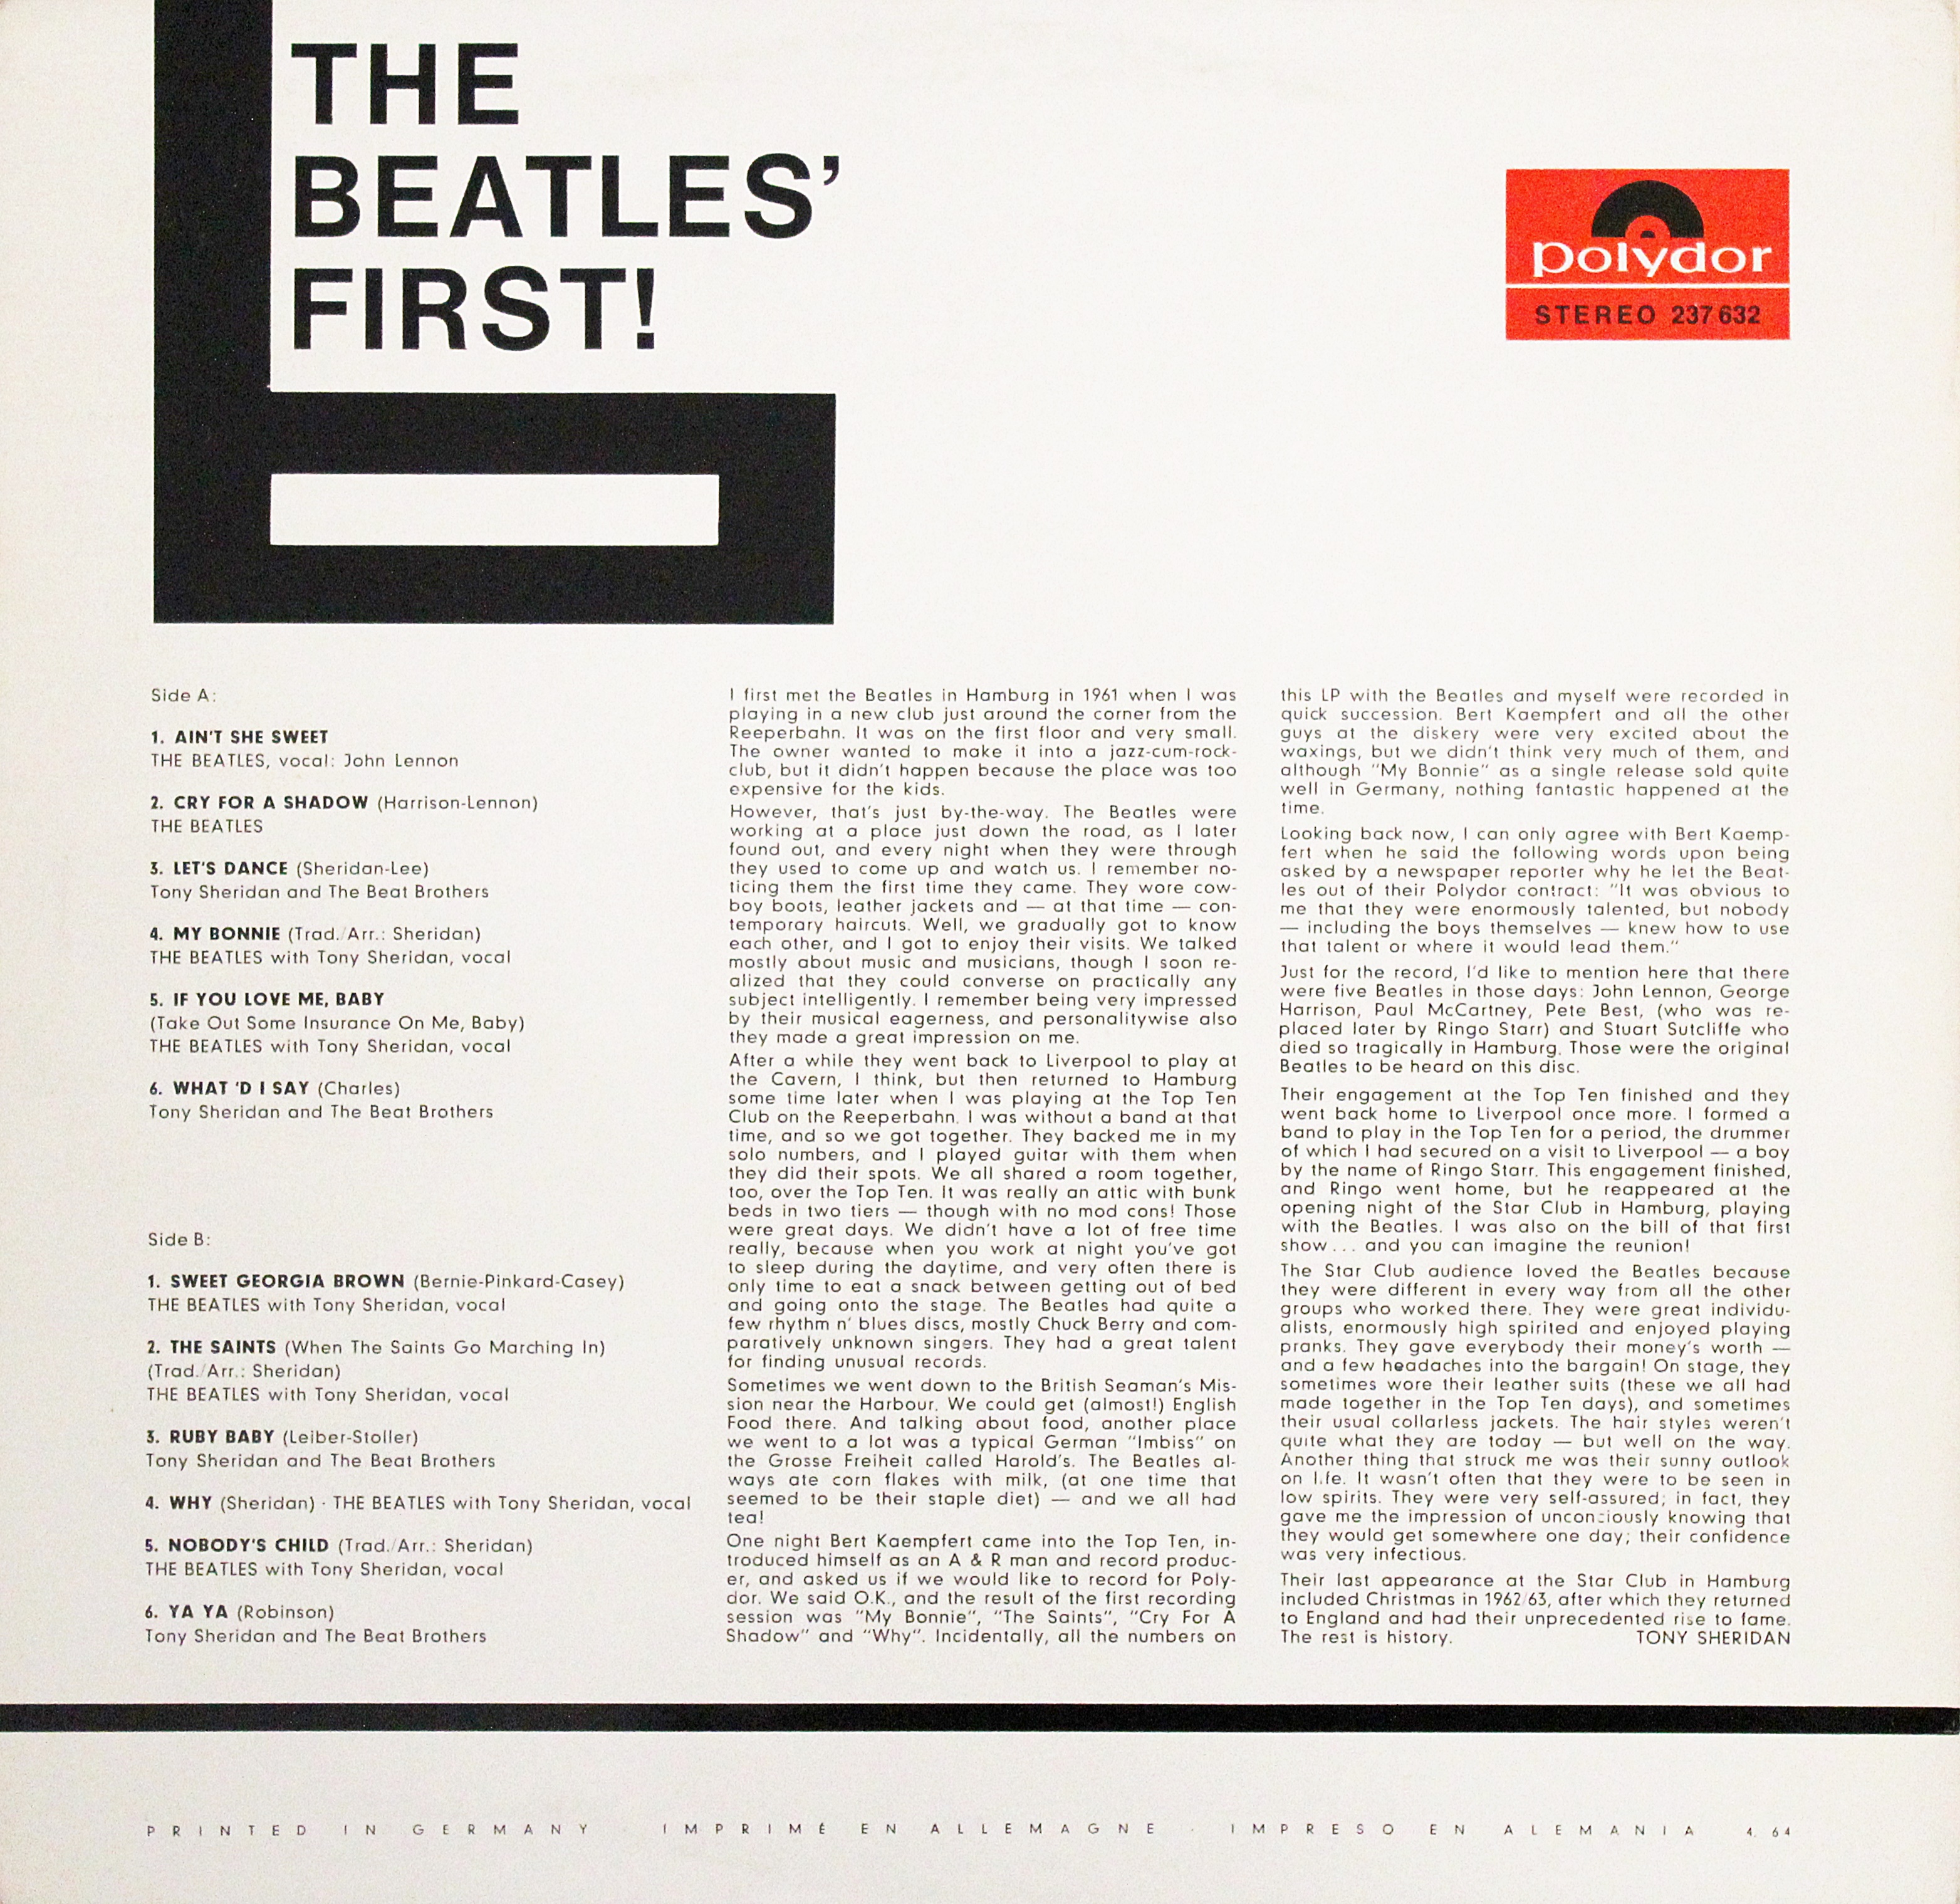 The Beatles Collection » The Beatles First, Polydor Special MCPS